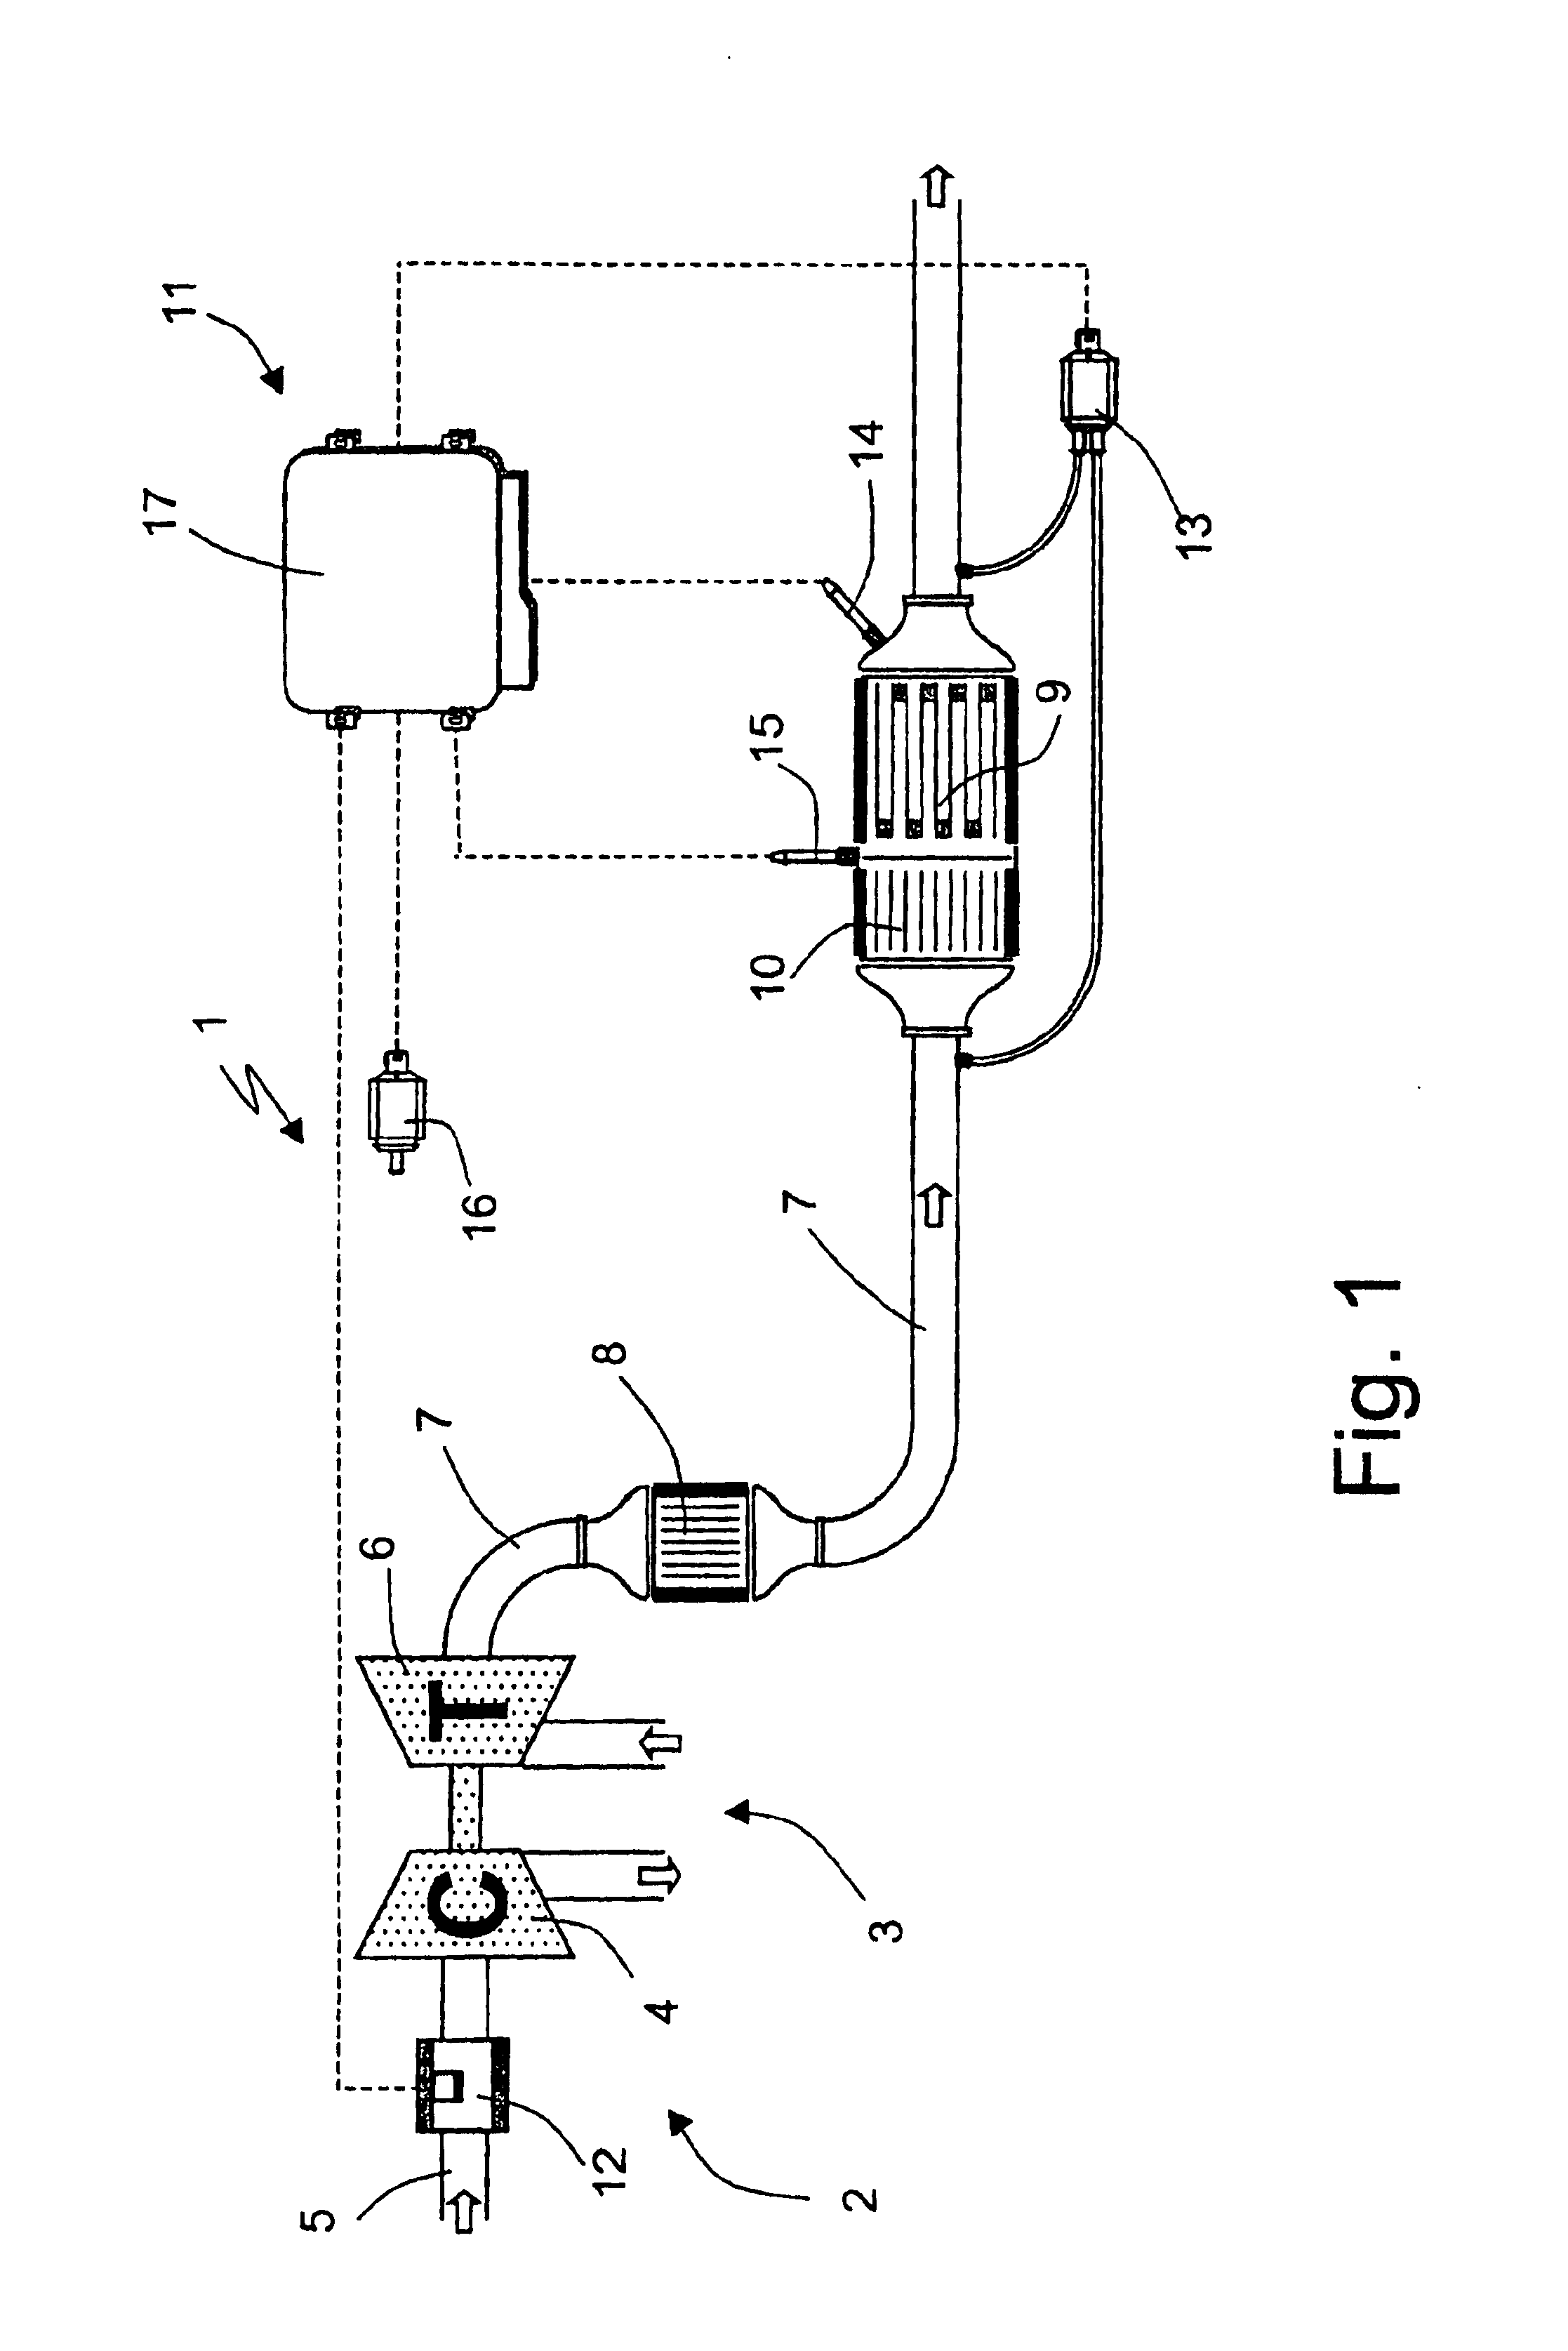 Method of determining the amount of particulate accumulated in a particulate filter